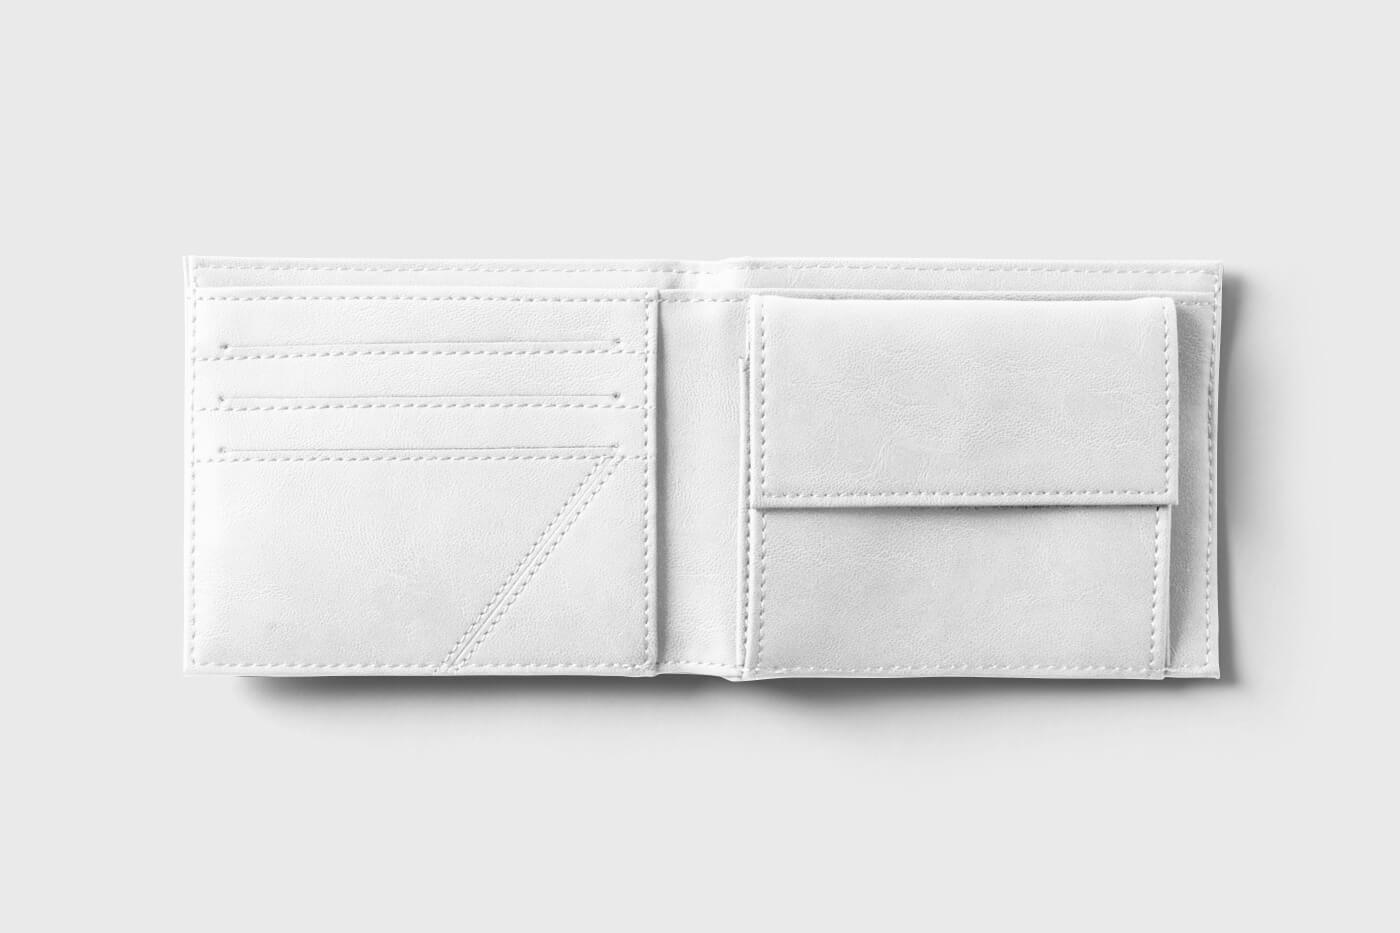 Top View of an Open Leather Wallet Mockup 